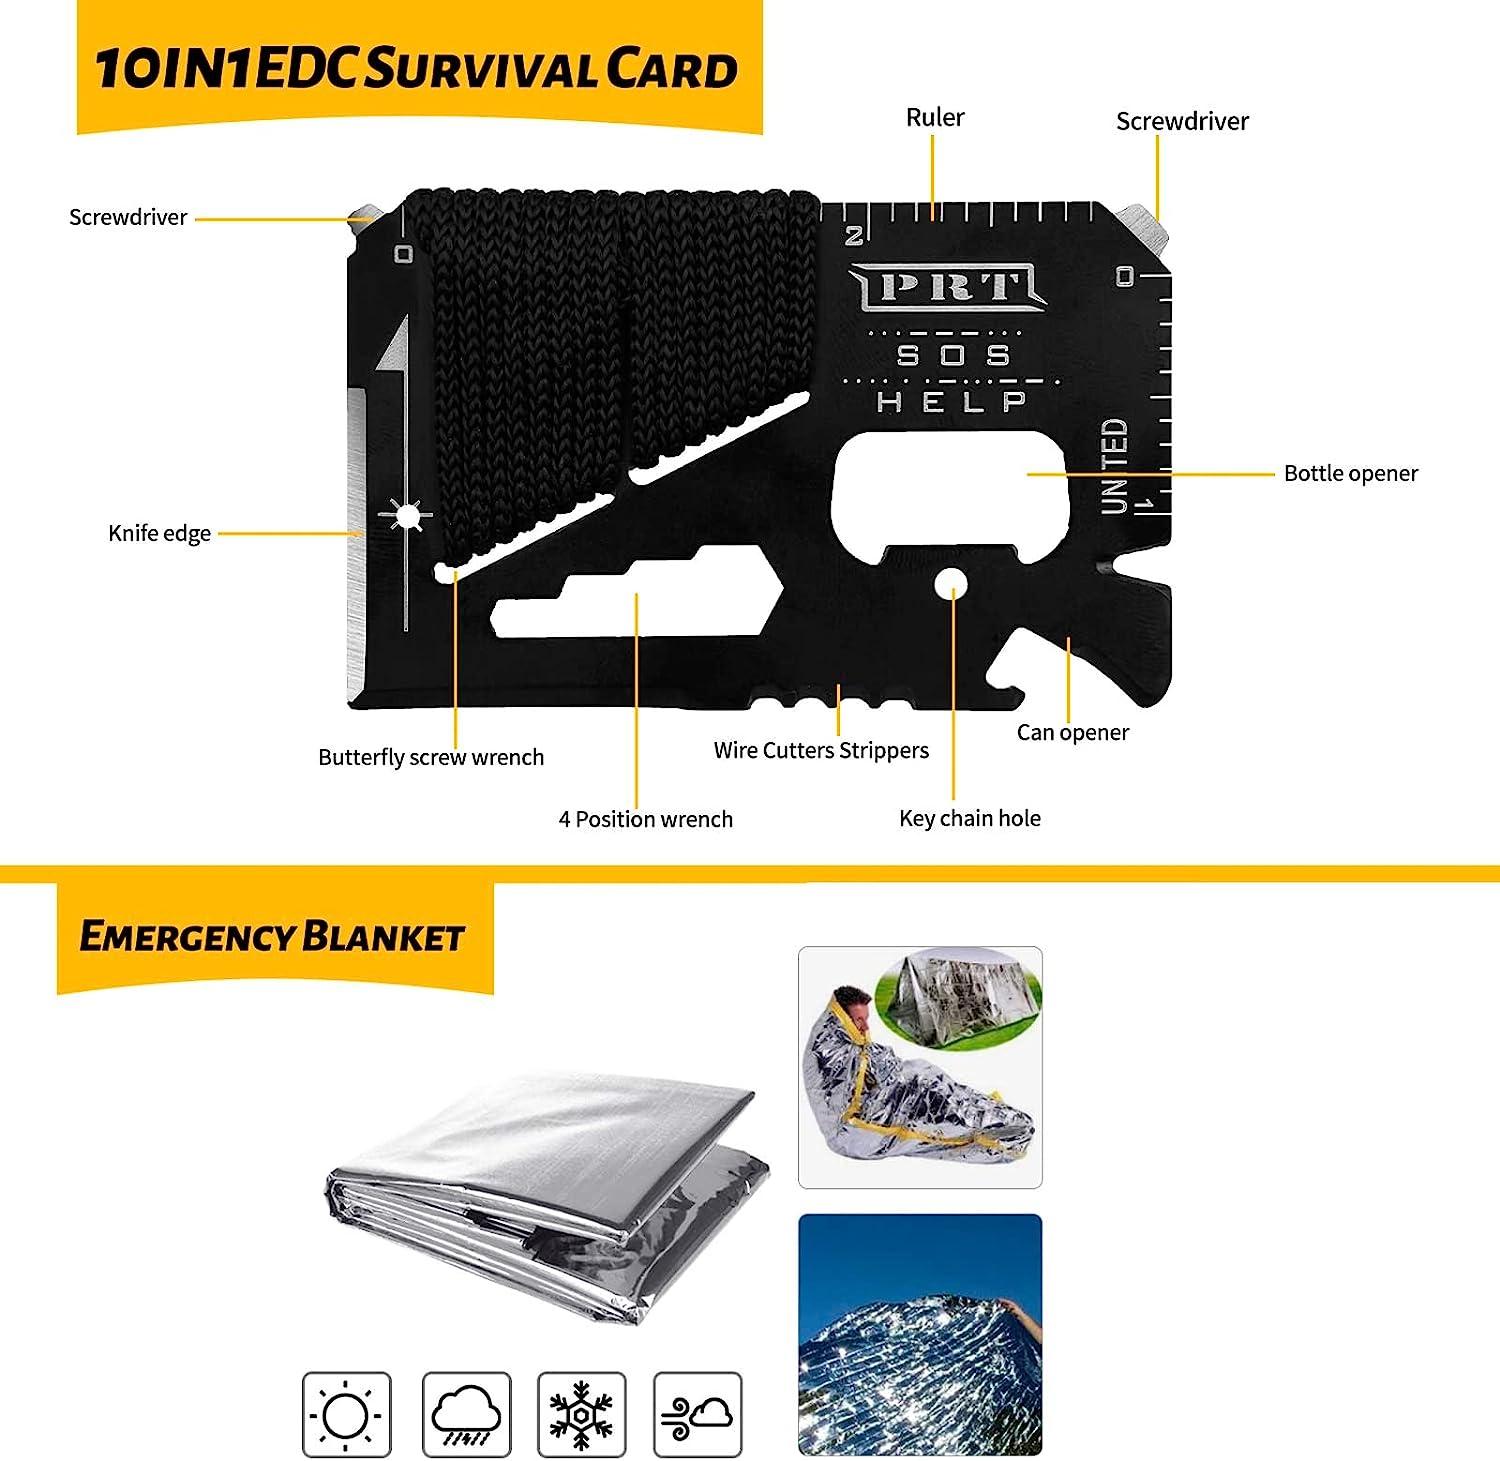 Survival SOS KIT - the most important survival tools, multitool, saw,  flint, compass, whistle, screwdrivers - . Gift Ideas